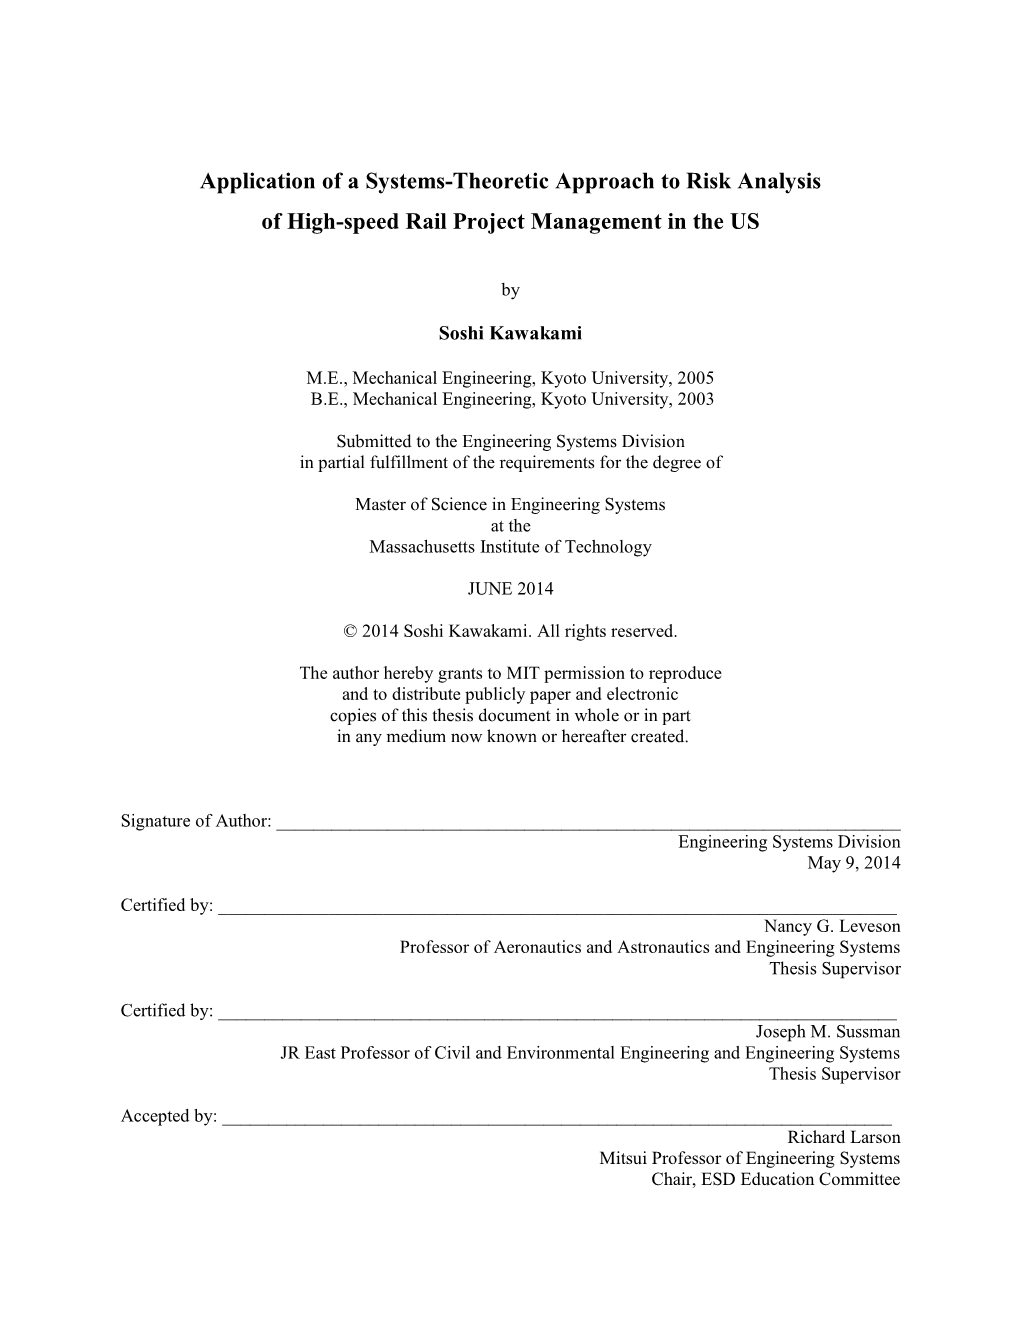 Application of a Systems-Theoretic Approach to Risk Analysis of High-Speed Rail Project Management in the US